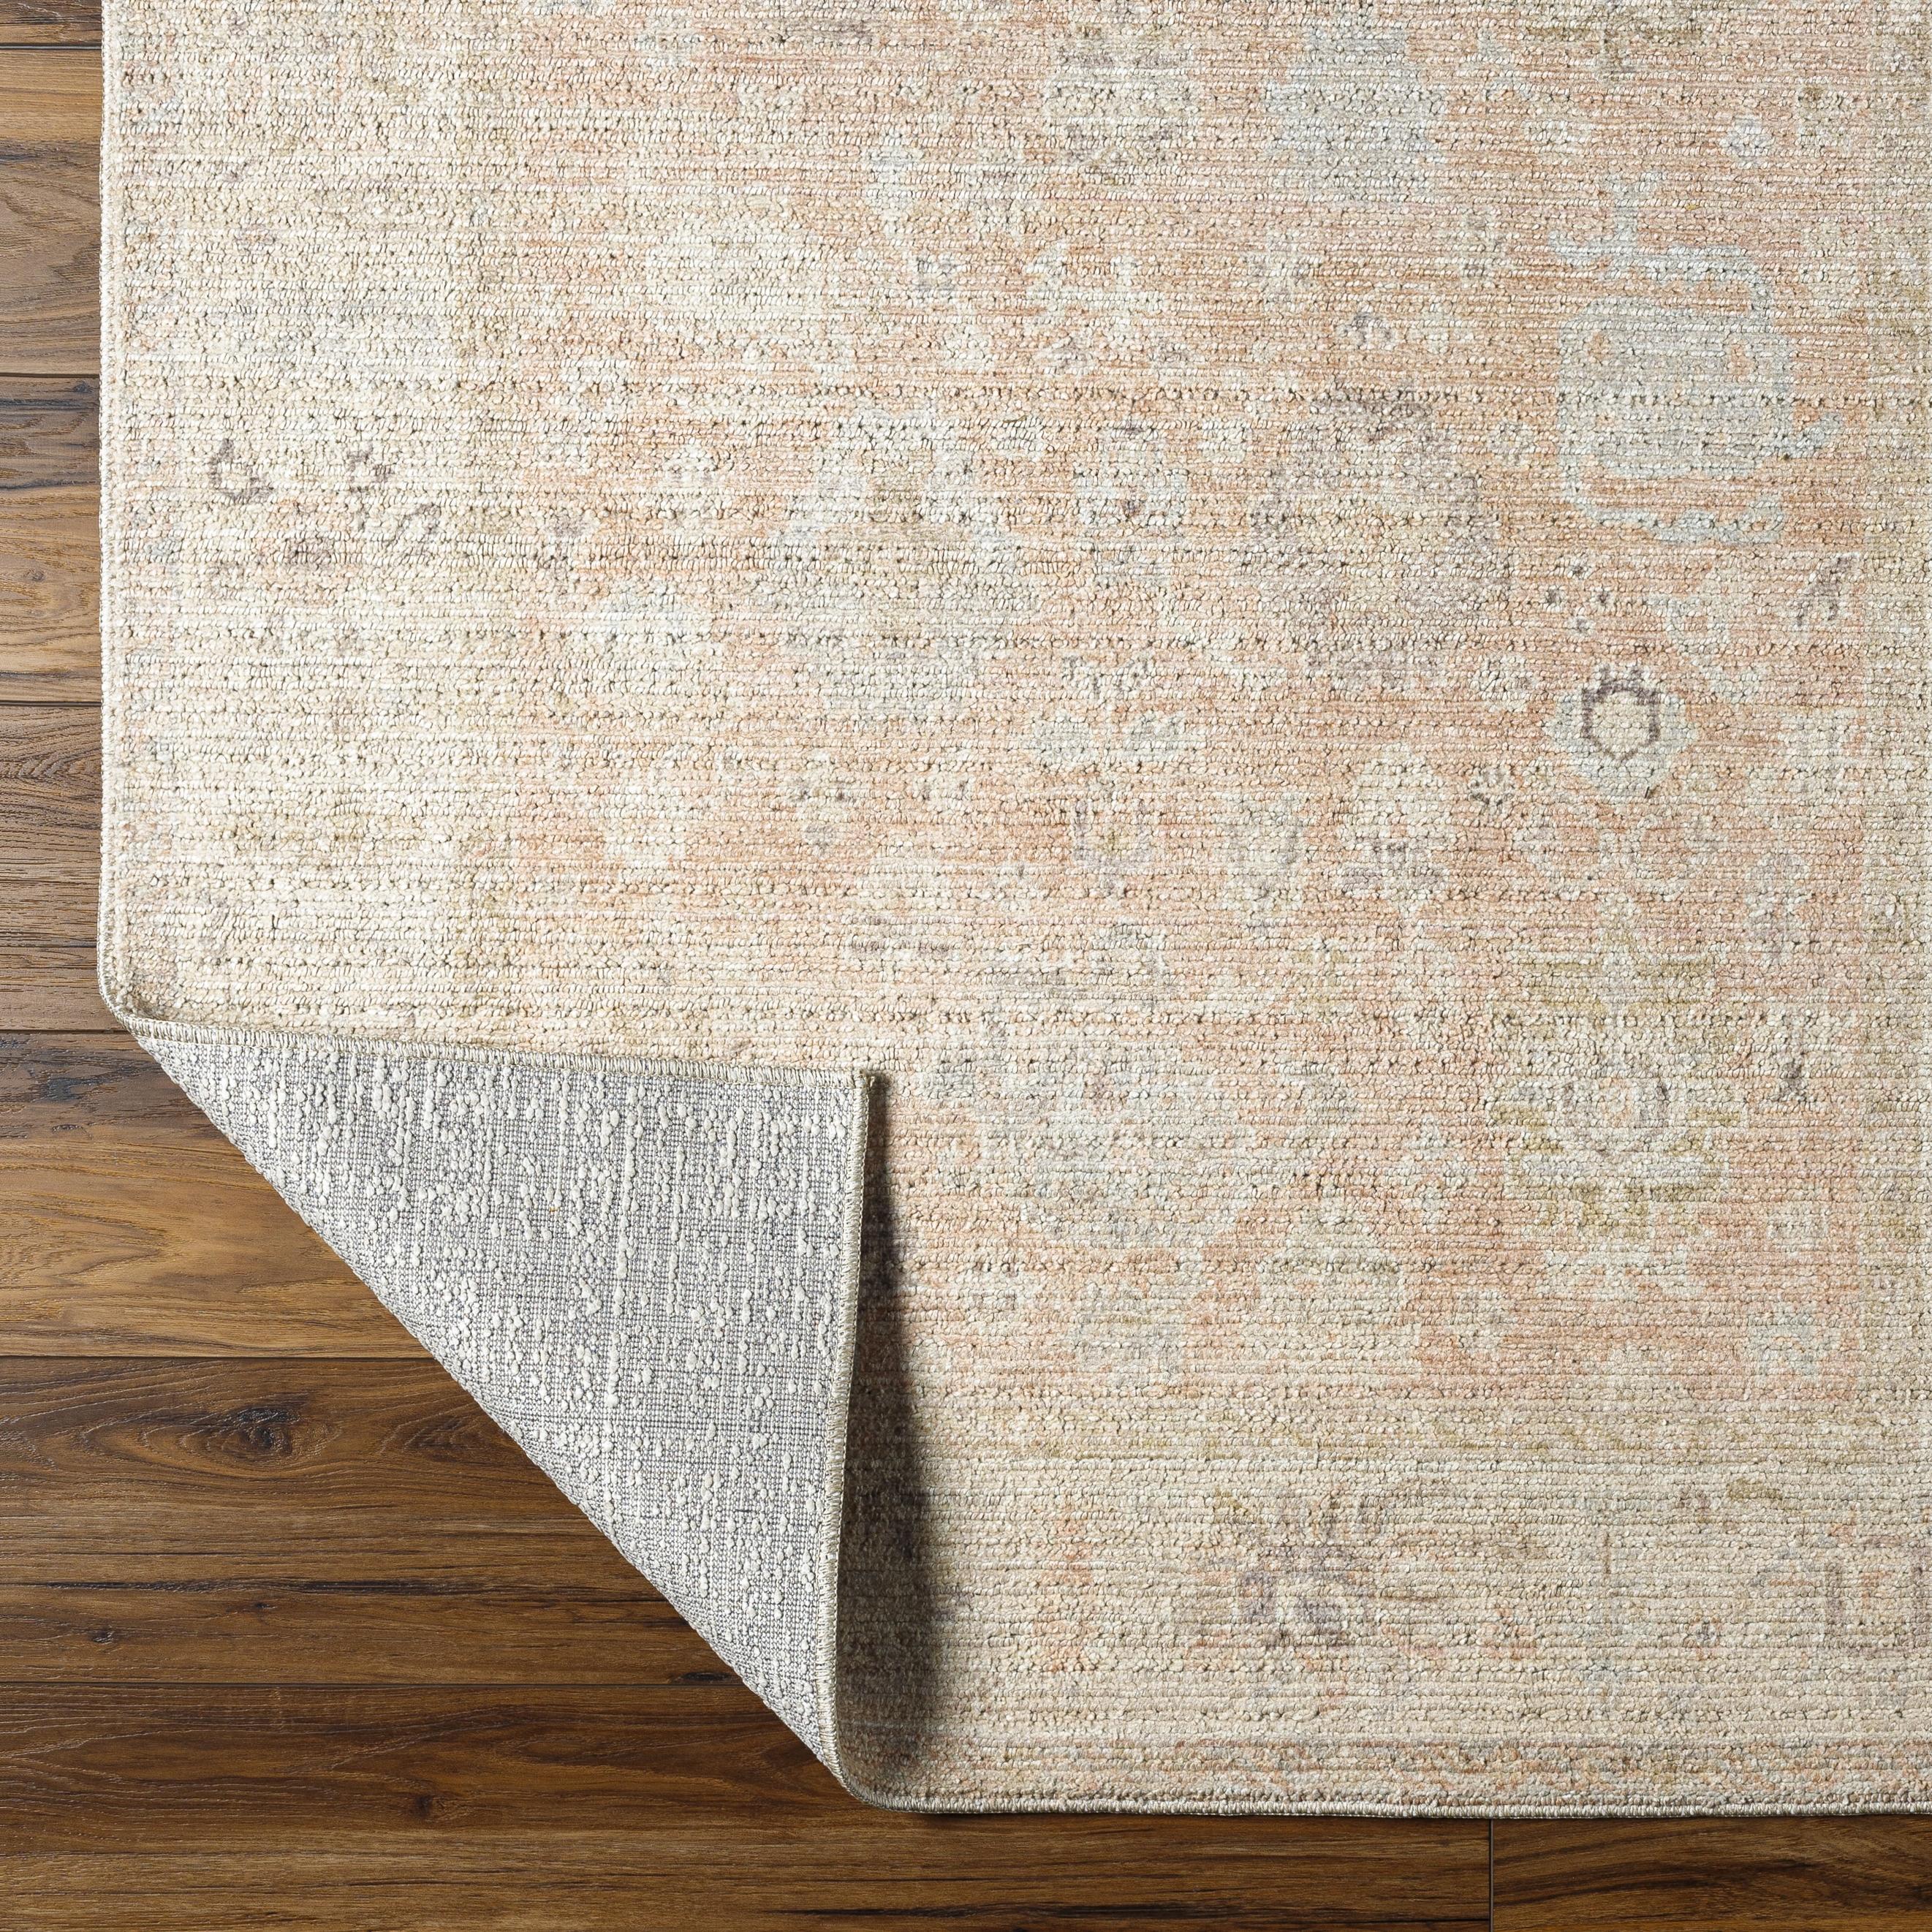 Introducing the Marlene area rug, a breathtaking piece of art designed as a special collaboration between Surya and Becki Owens. This stunning rug is a beautiful way to add style to any space. It features a vintage-inspired design which is sure to bring a touch of sophistication to your home. Amethyst Home provides interior design, new home construction design consulting, vintage area rugs, and lighting in the Charlotte metro area.